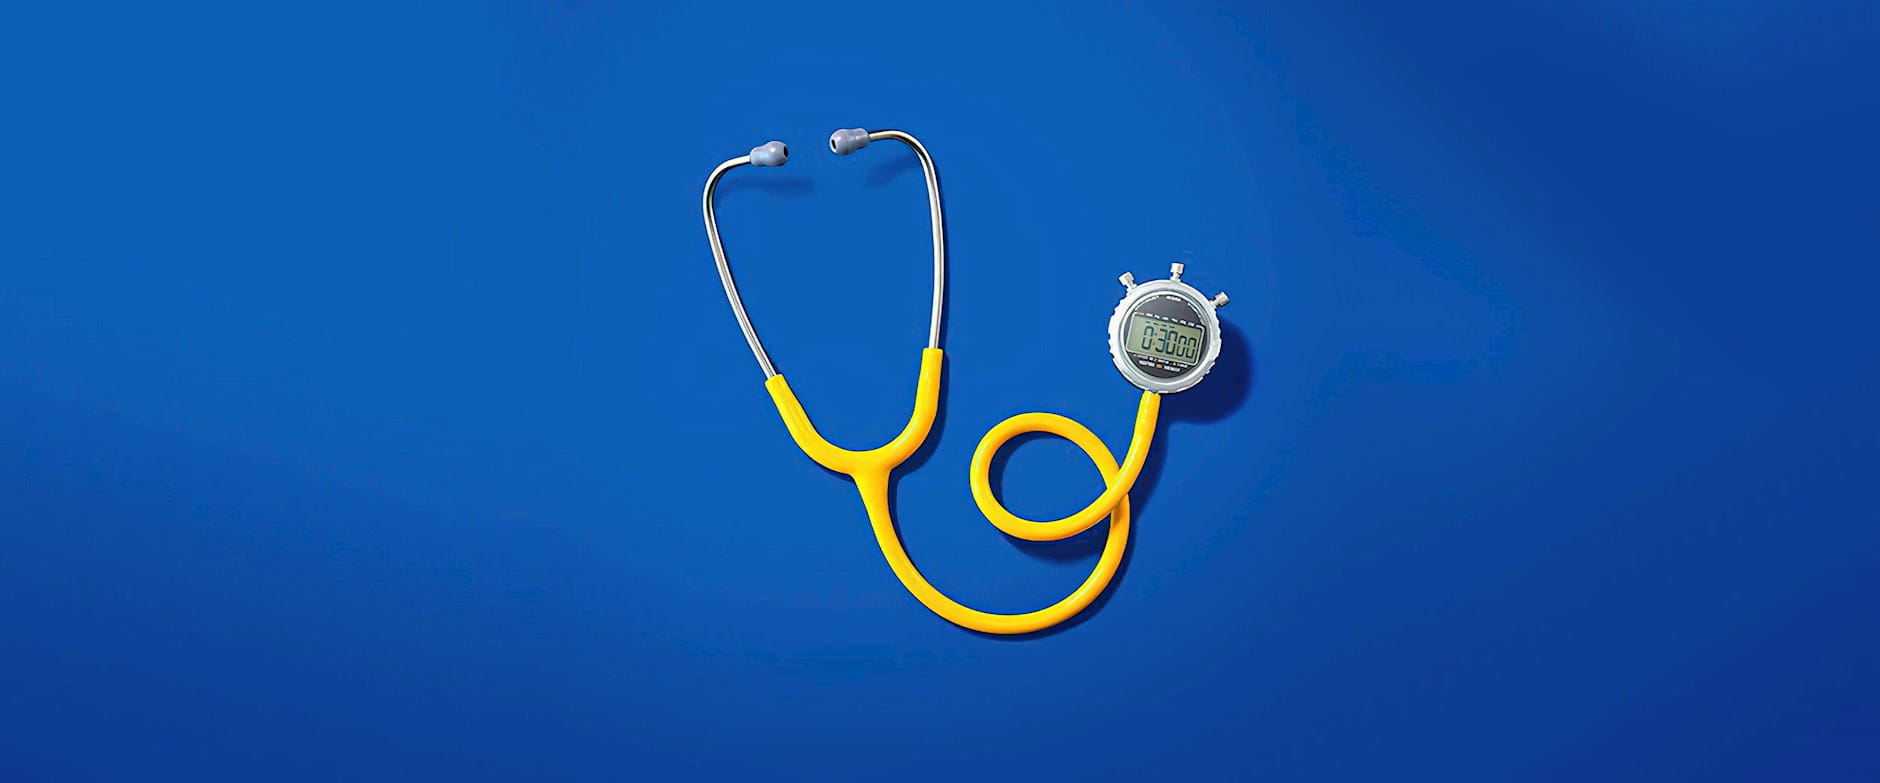 Stethoscope with a stopwatch on its end